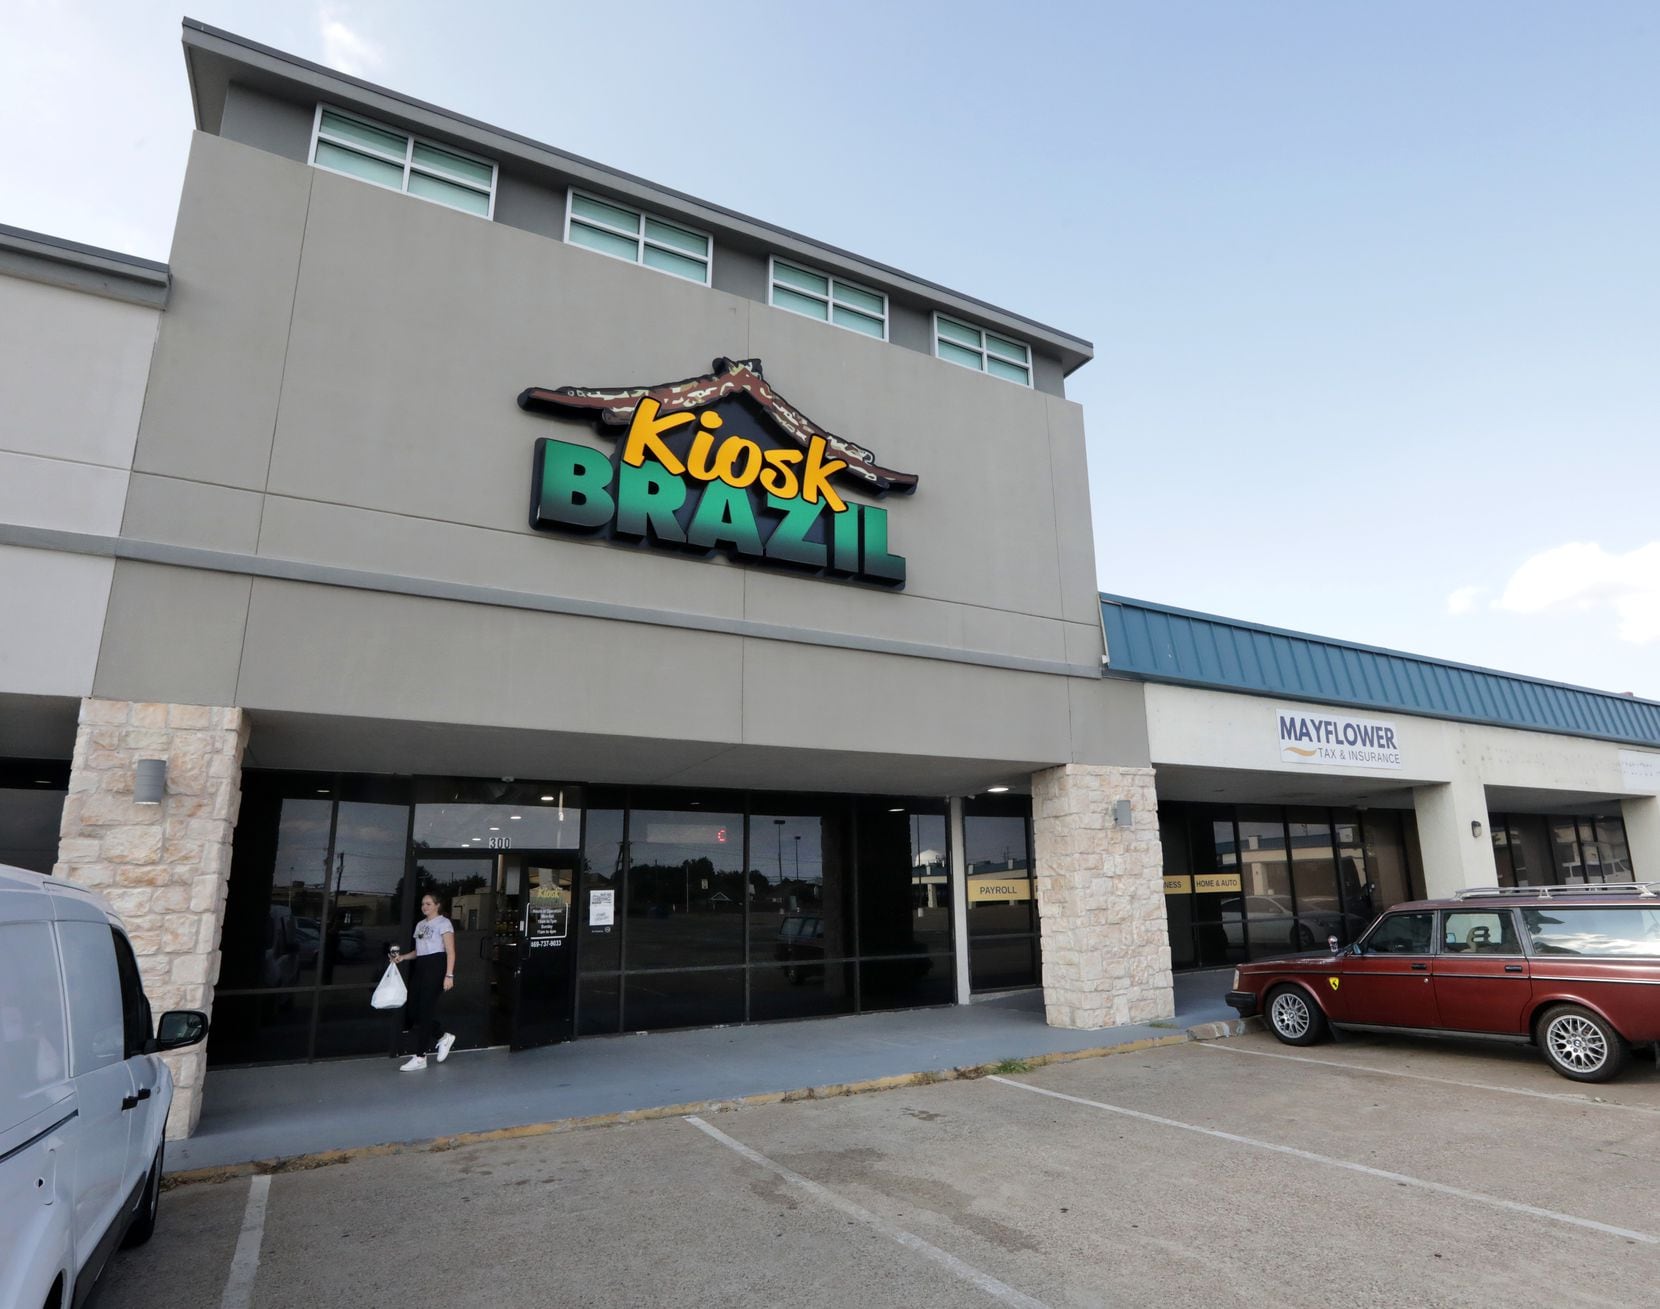 Kiosk Brazil is located on Parker Road in Plano.